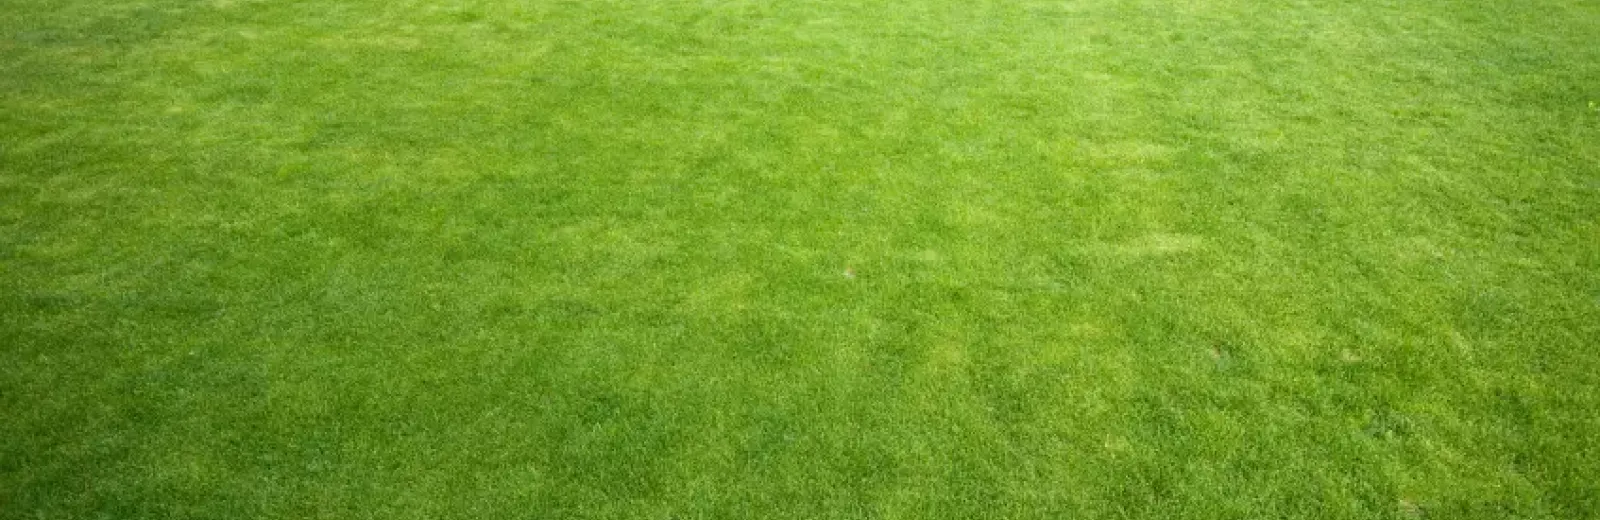 lawn after aeration